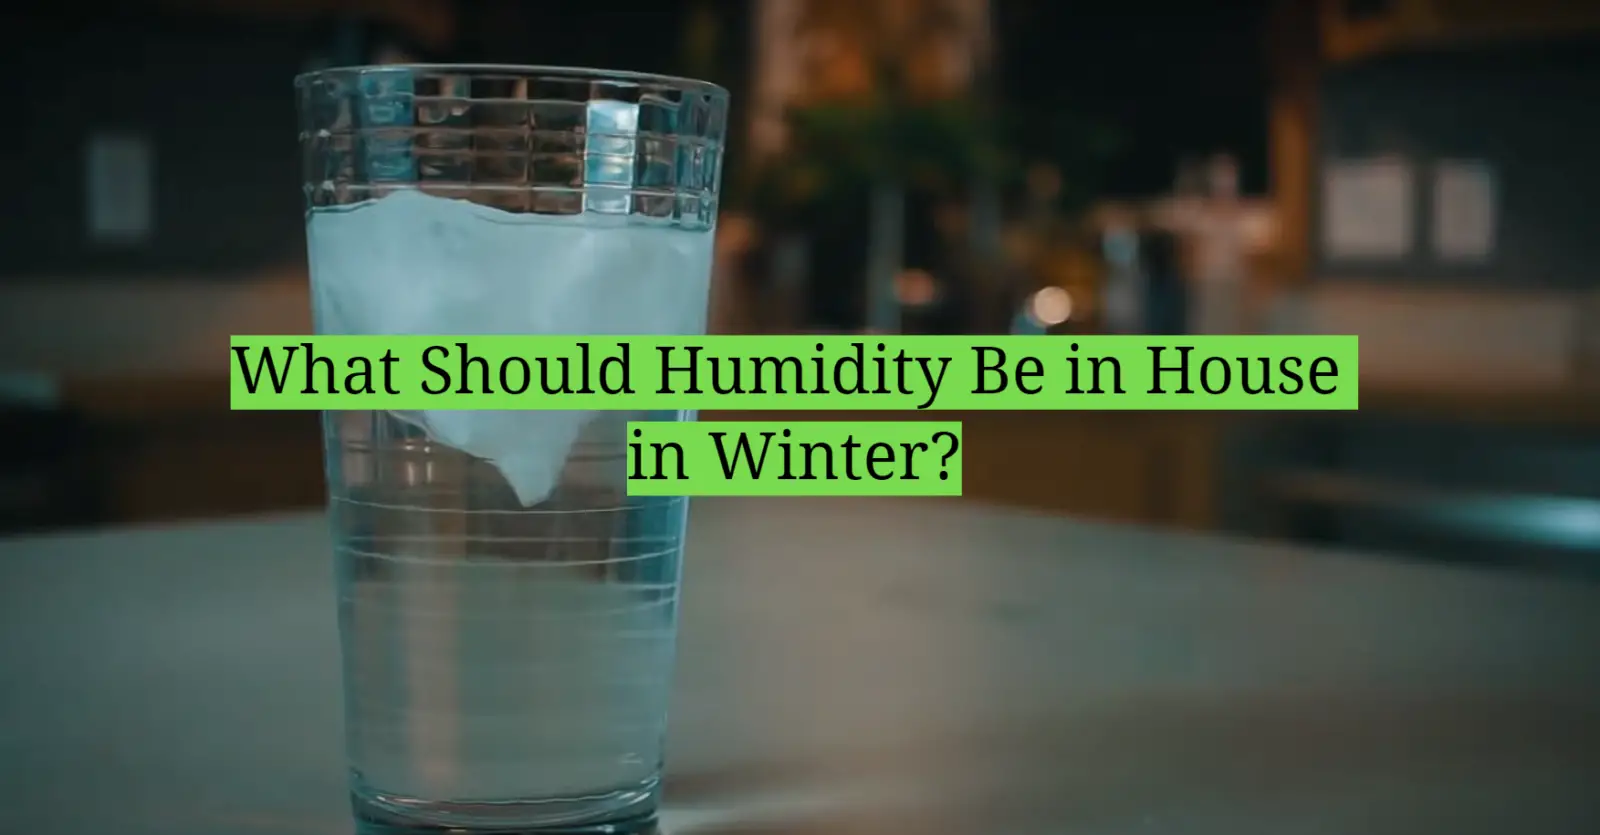 What Should Humidity Be in House in Winter?